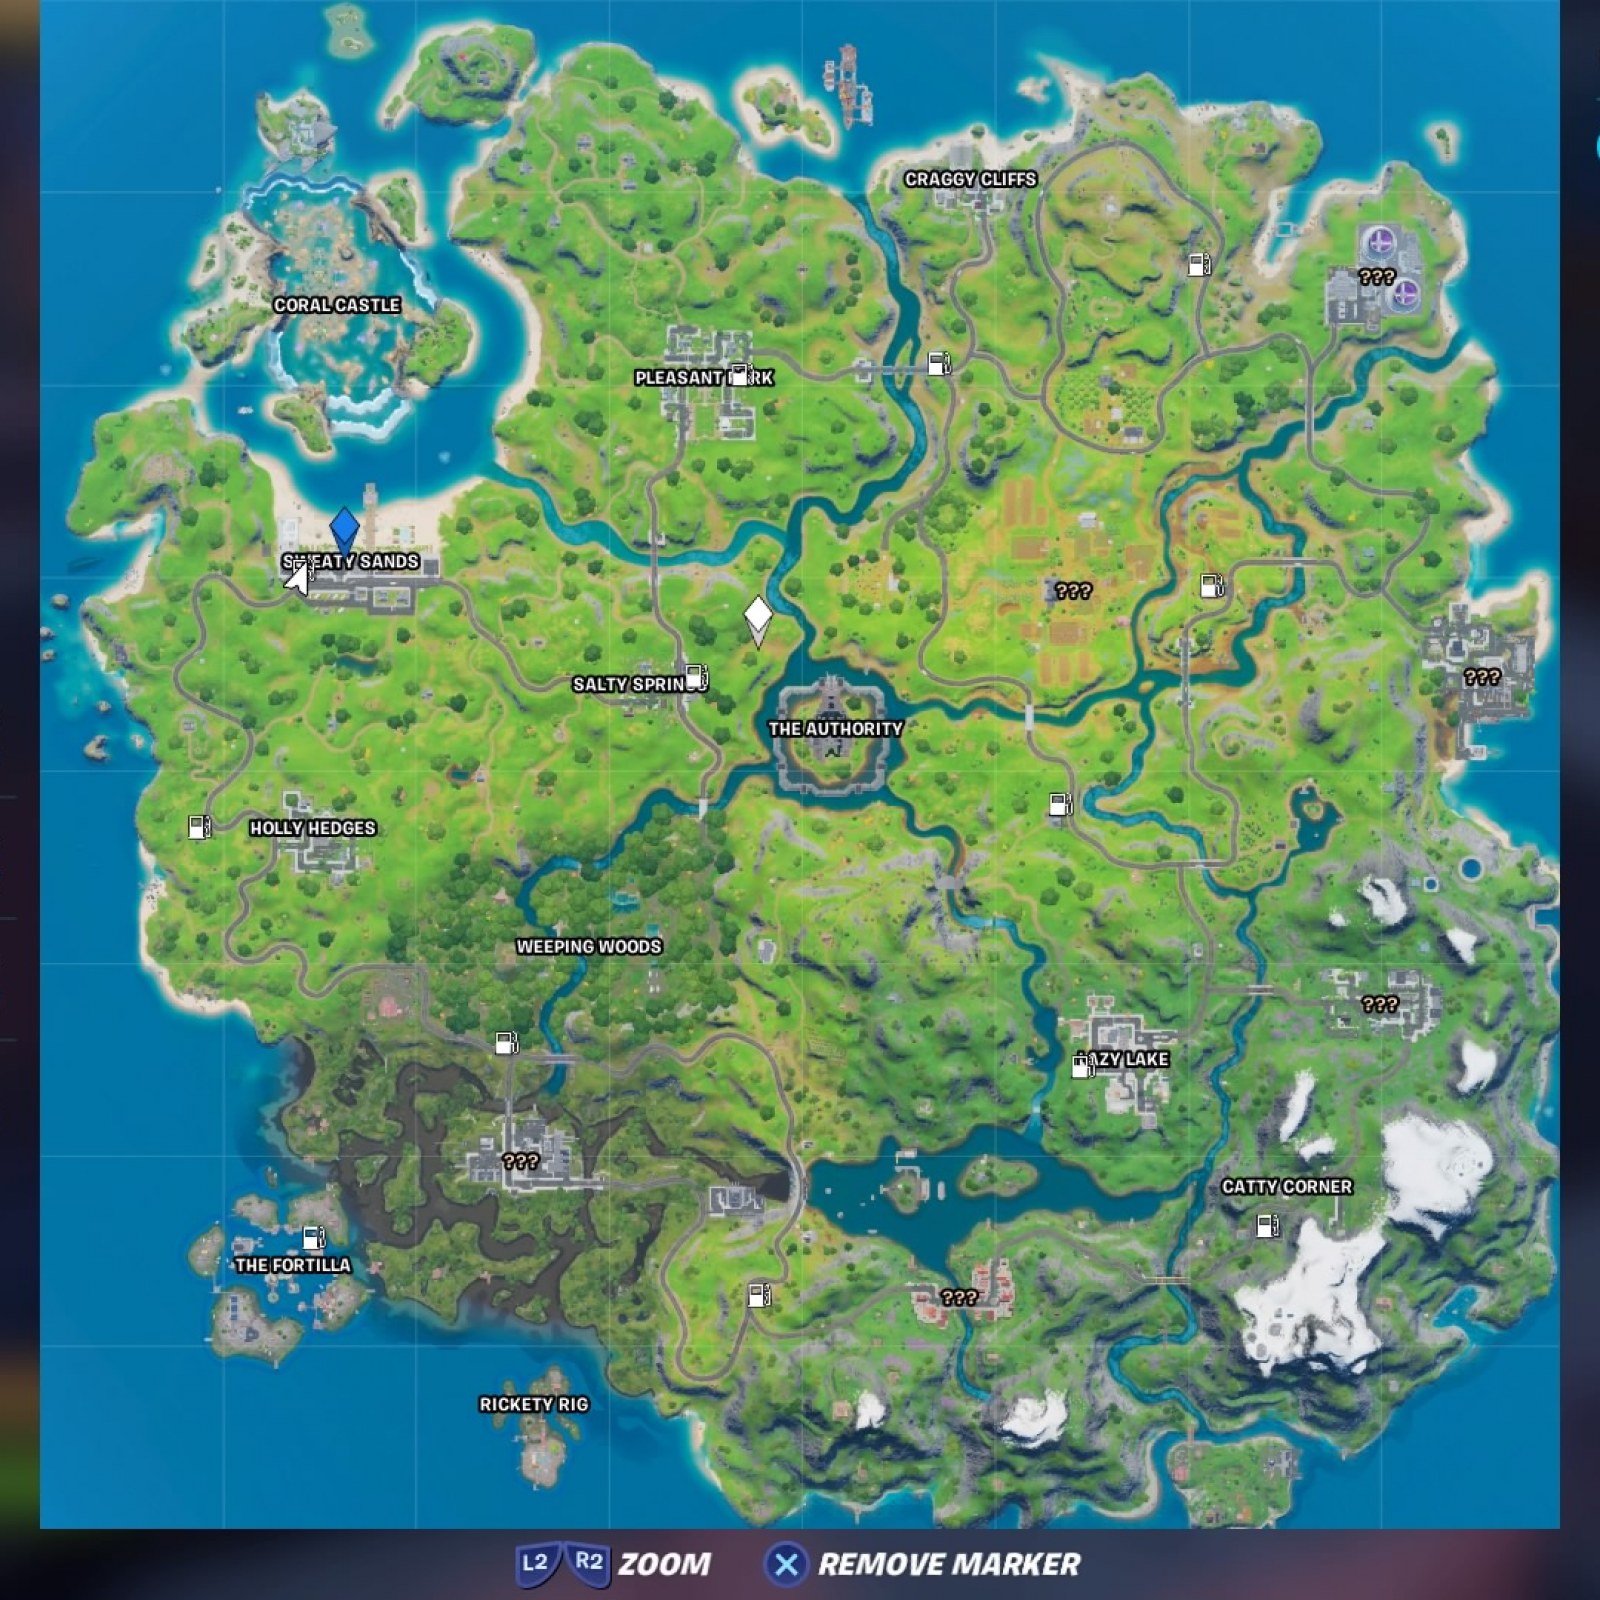 Fortnite Vechile Locations Fortnite Cars Guide Locations How To Gas Up Where To Find Gas Cans